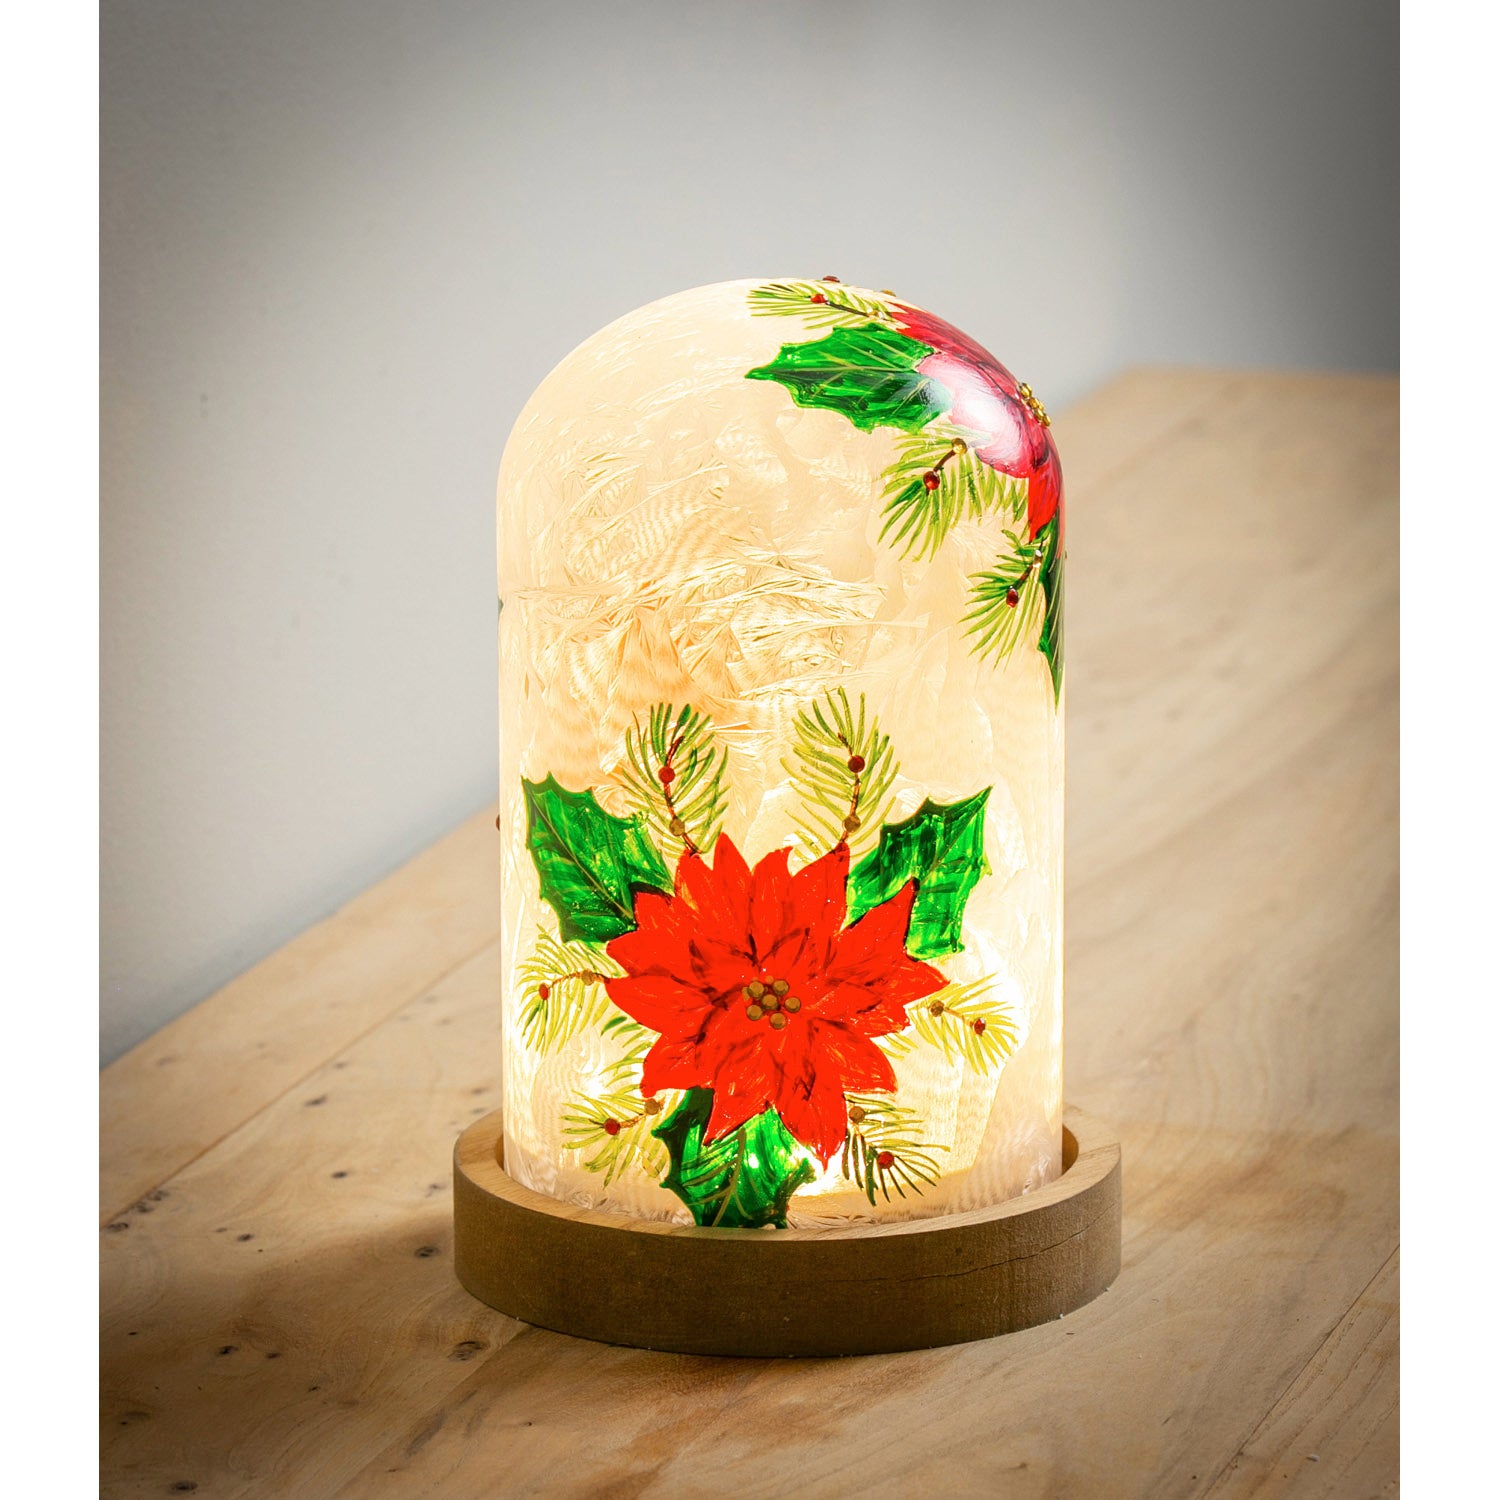 Glass Handpainted Poinsettia LED Cloche w/ Wooden Base